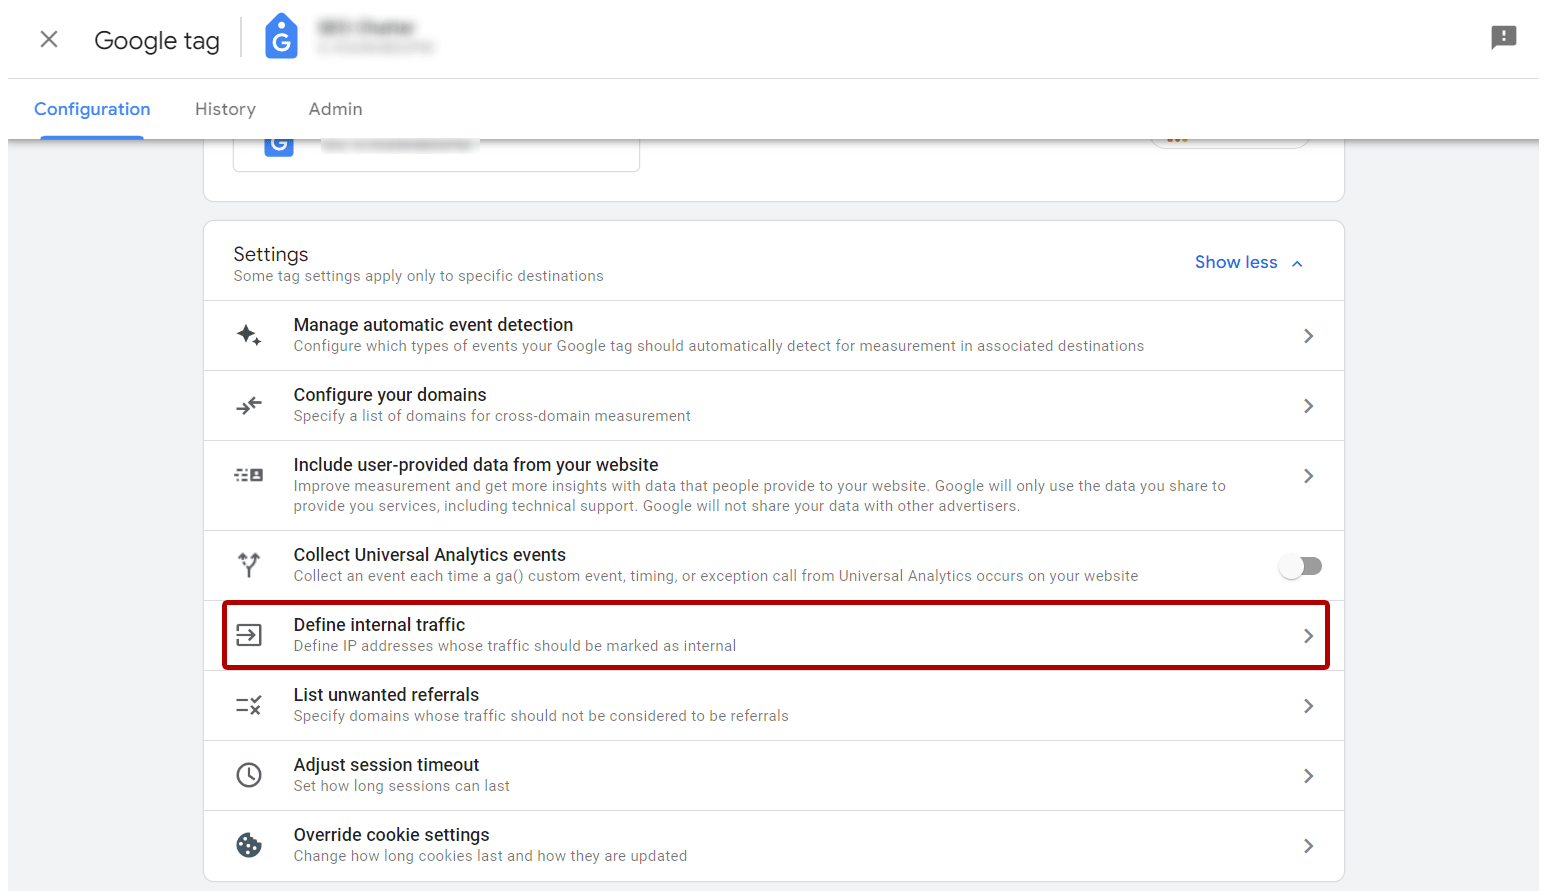 Step 8: Define Internal Traffic Option to Stop Google Analytics from Tracking Visits